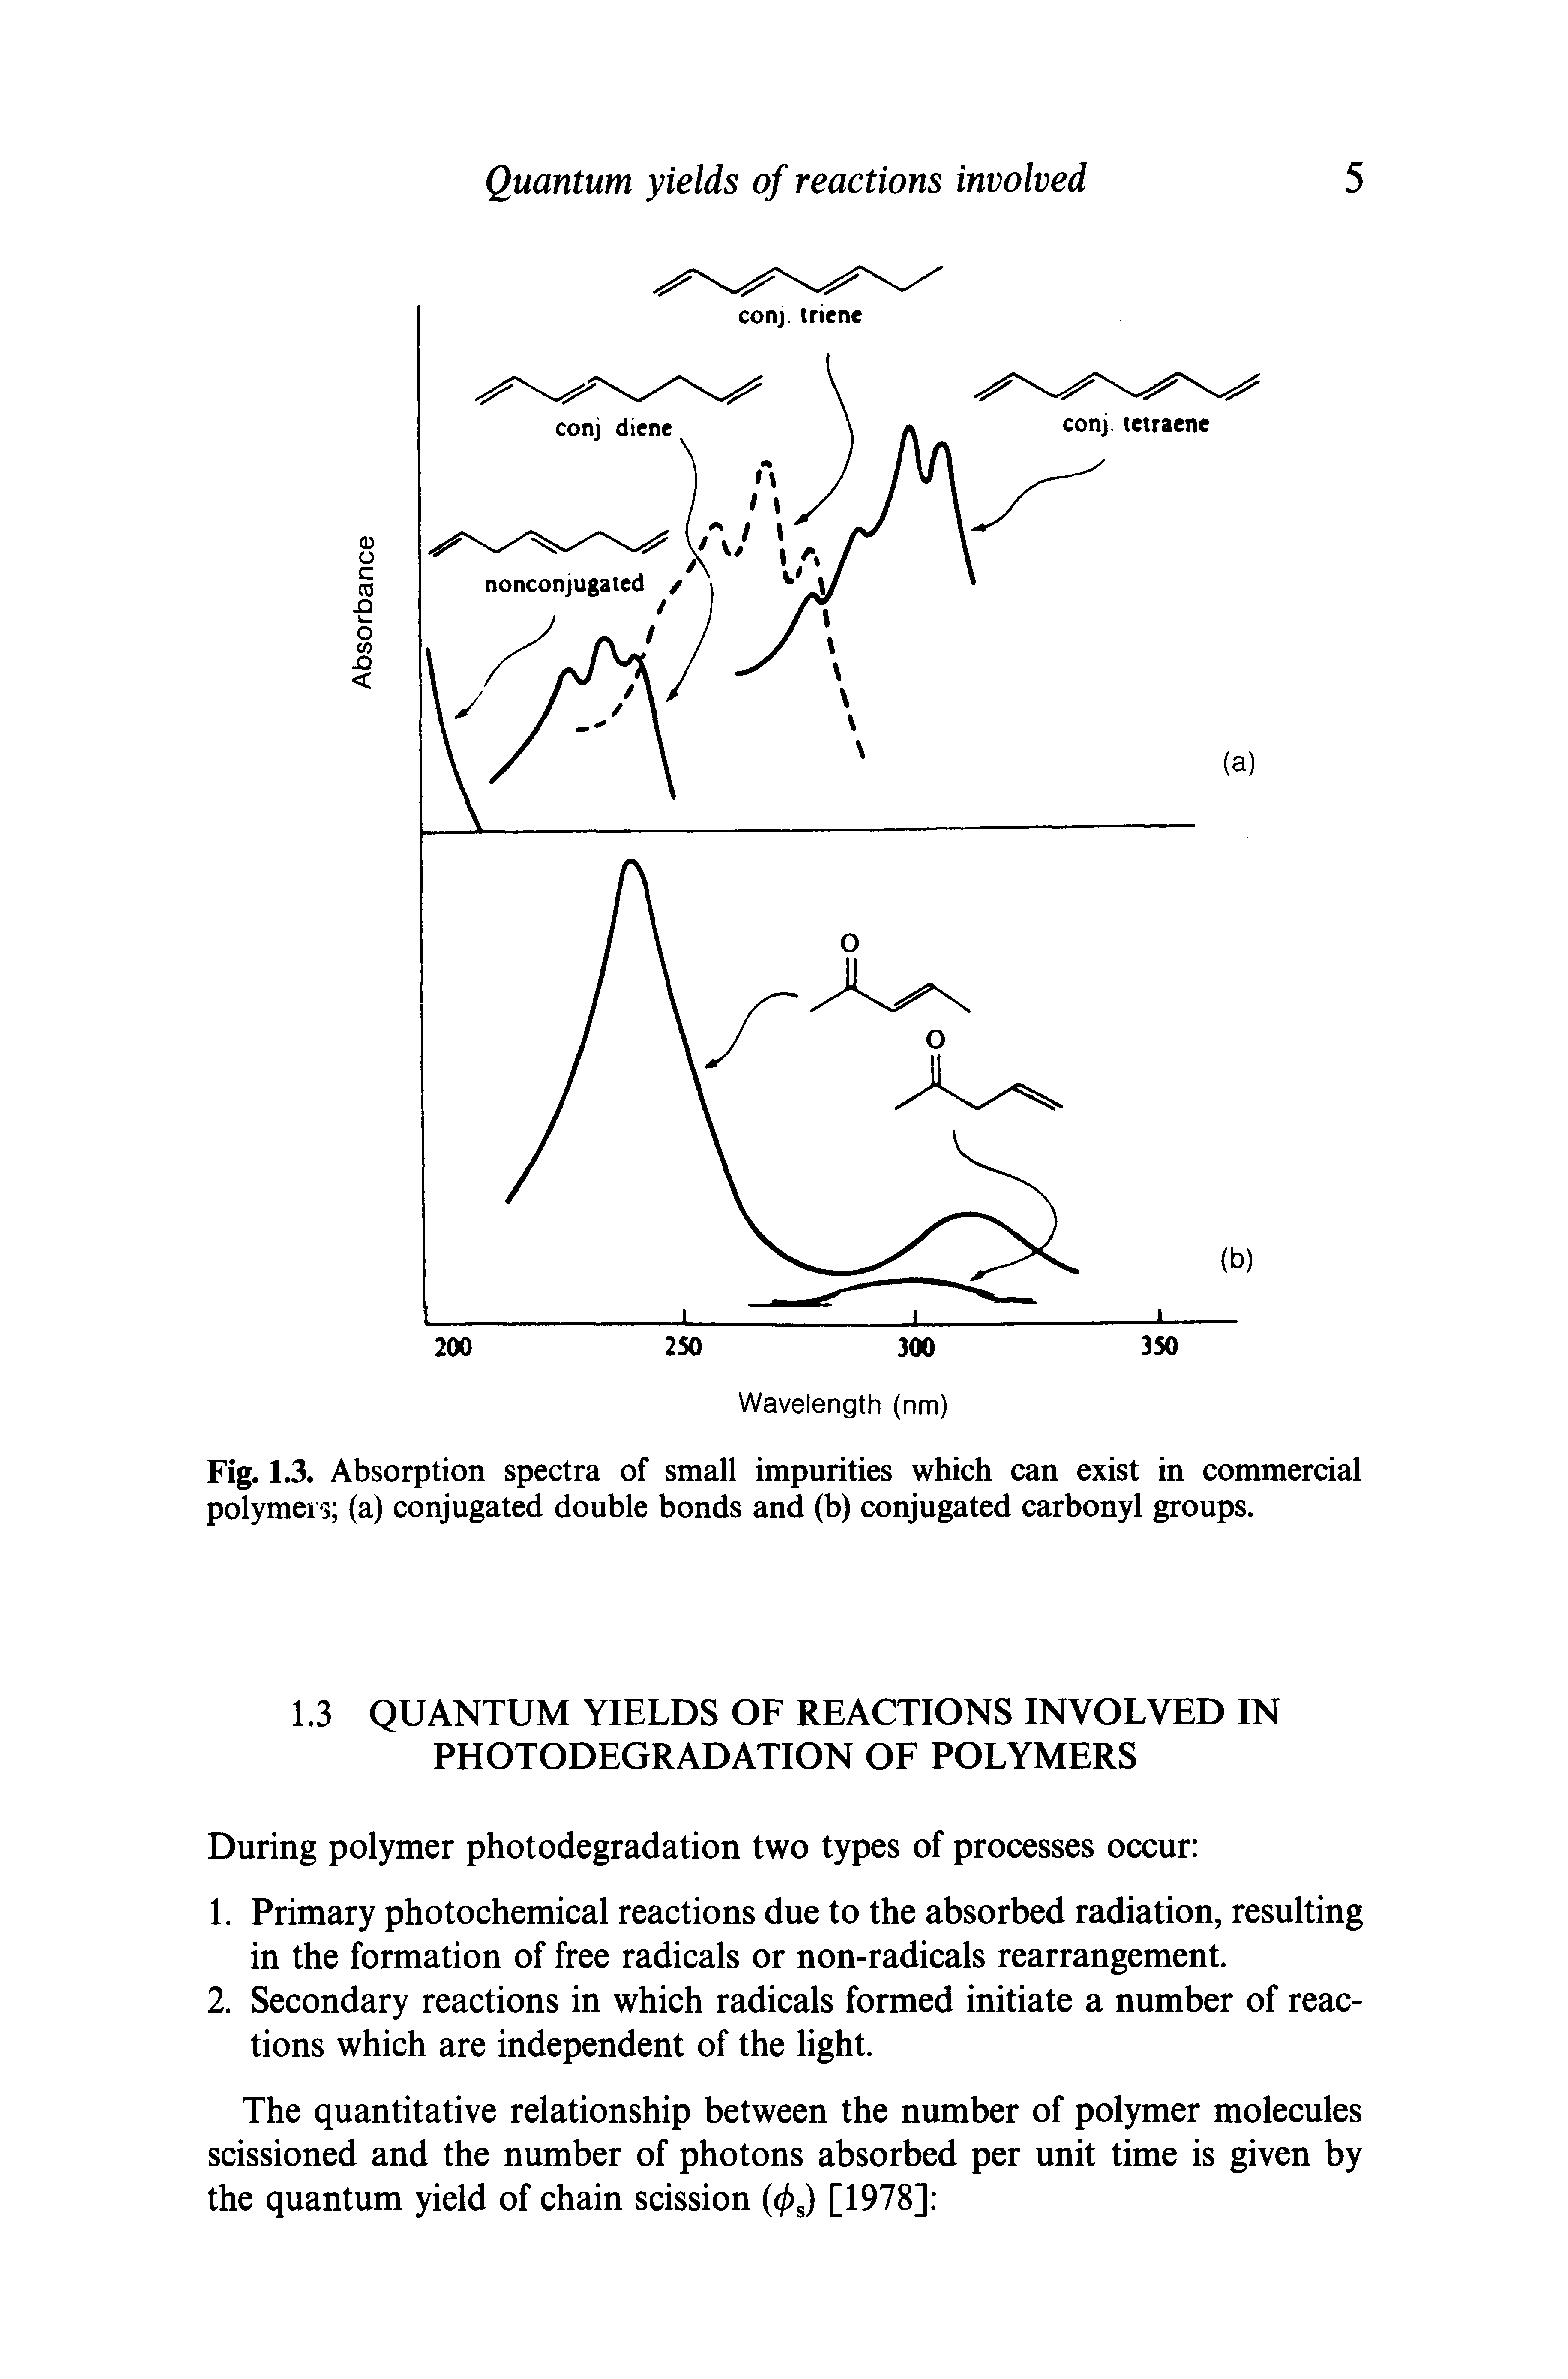 Fig. 1.3. Absorption spectra of small impurities which can exist in commercial polymers (a) conjugated double bonds and (b) conjugated carbonyl groups.